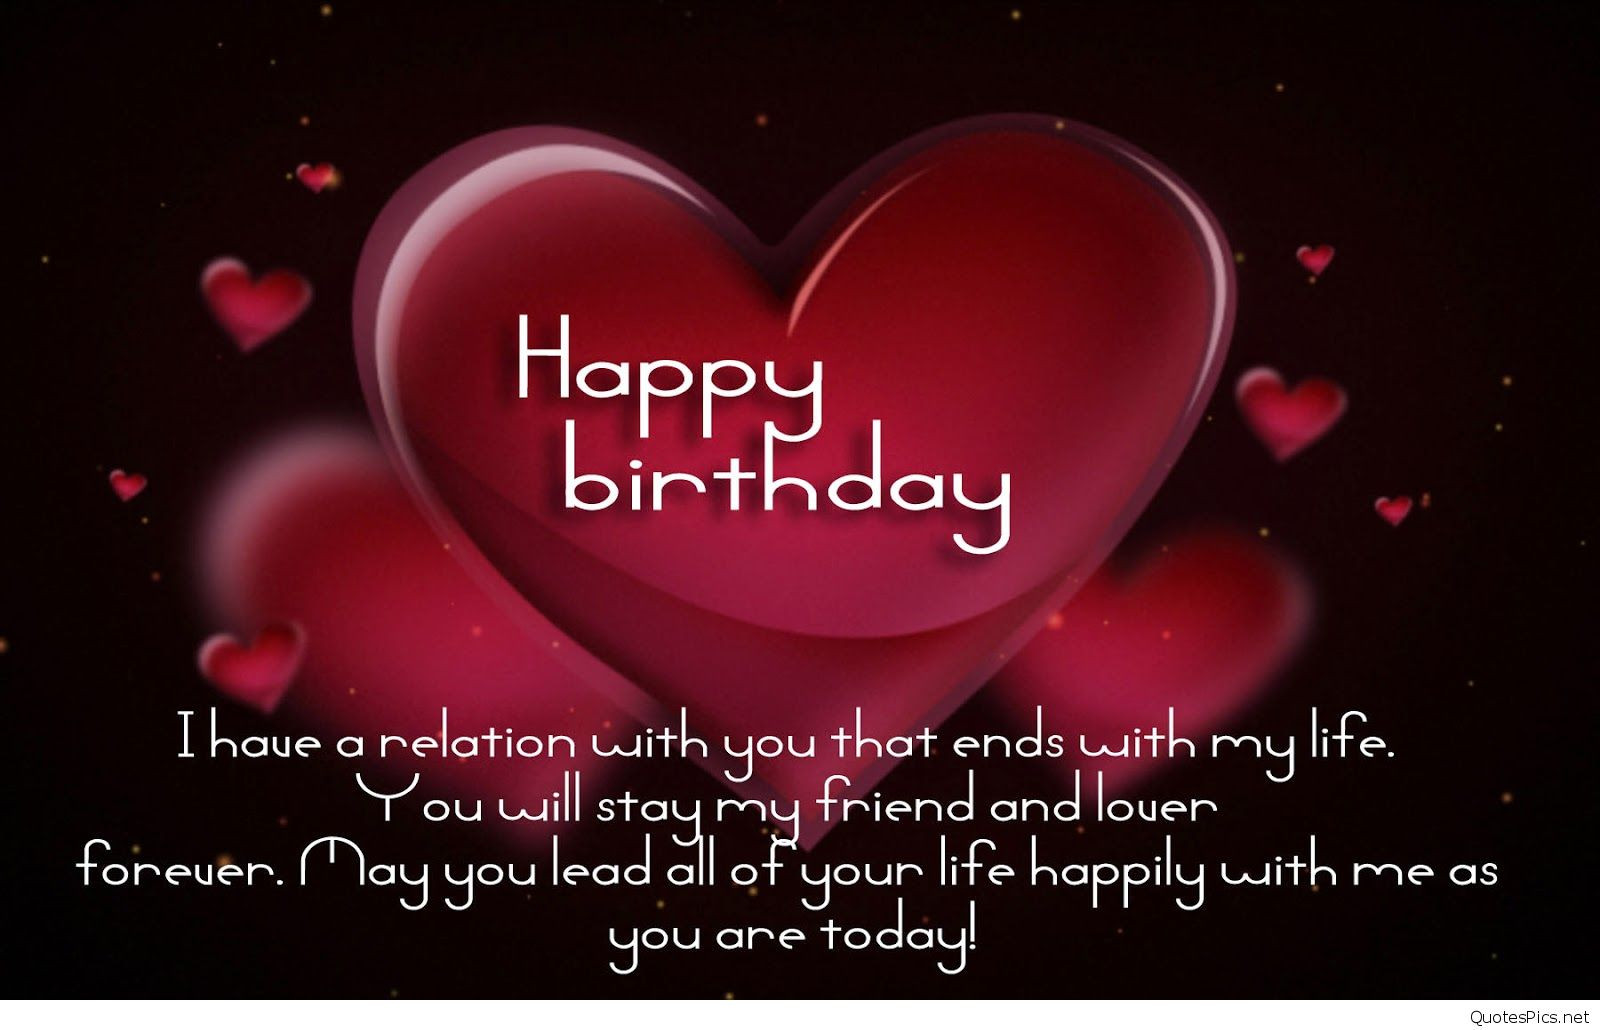 Birthday Love Wishes
 Love happy birthday wishes cards sayings